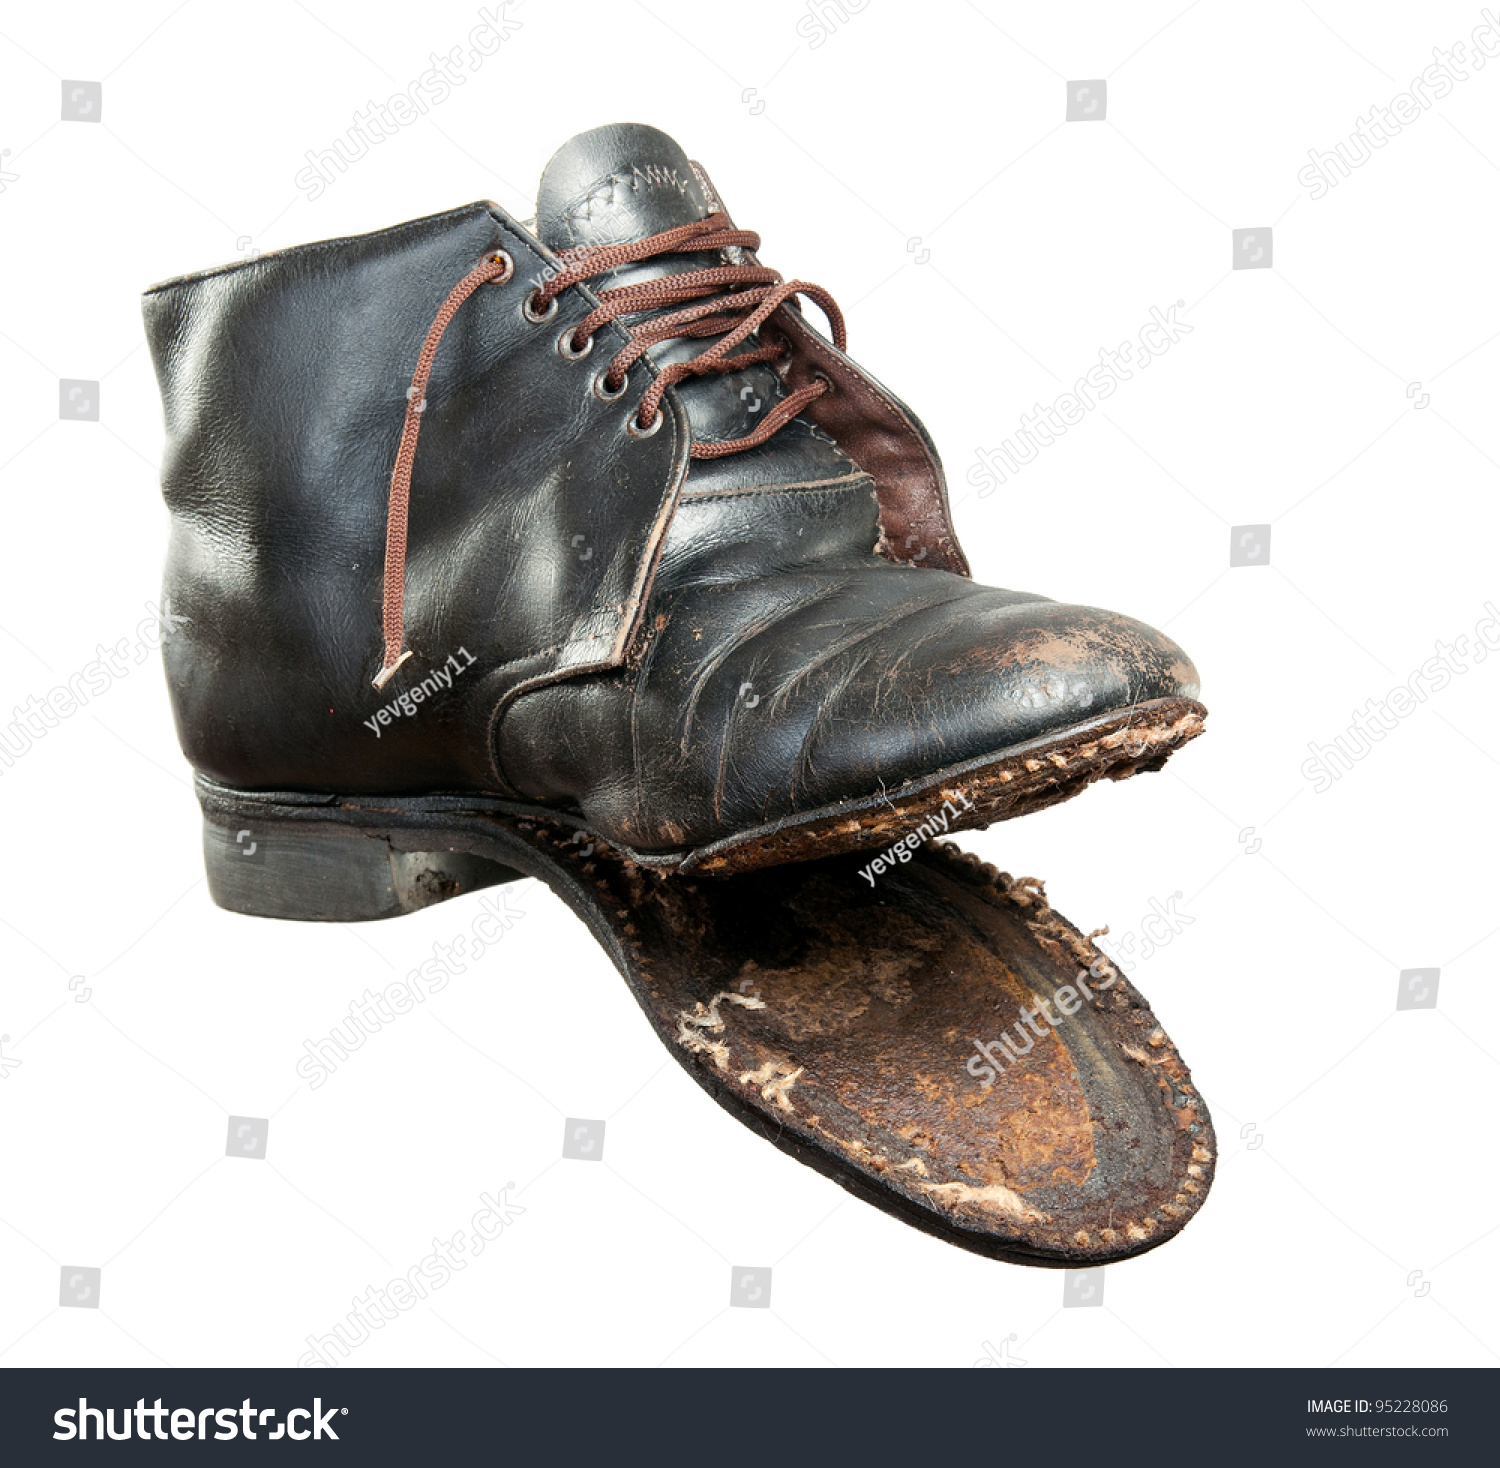 stock-photo-torn-shoe-isolated-on-a-white-background-95228086.jpg